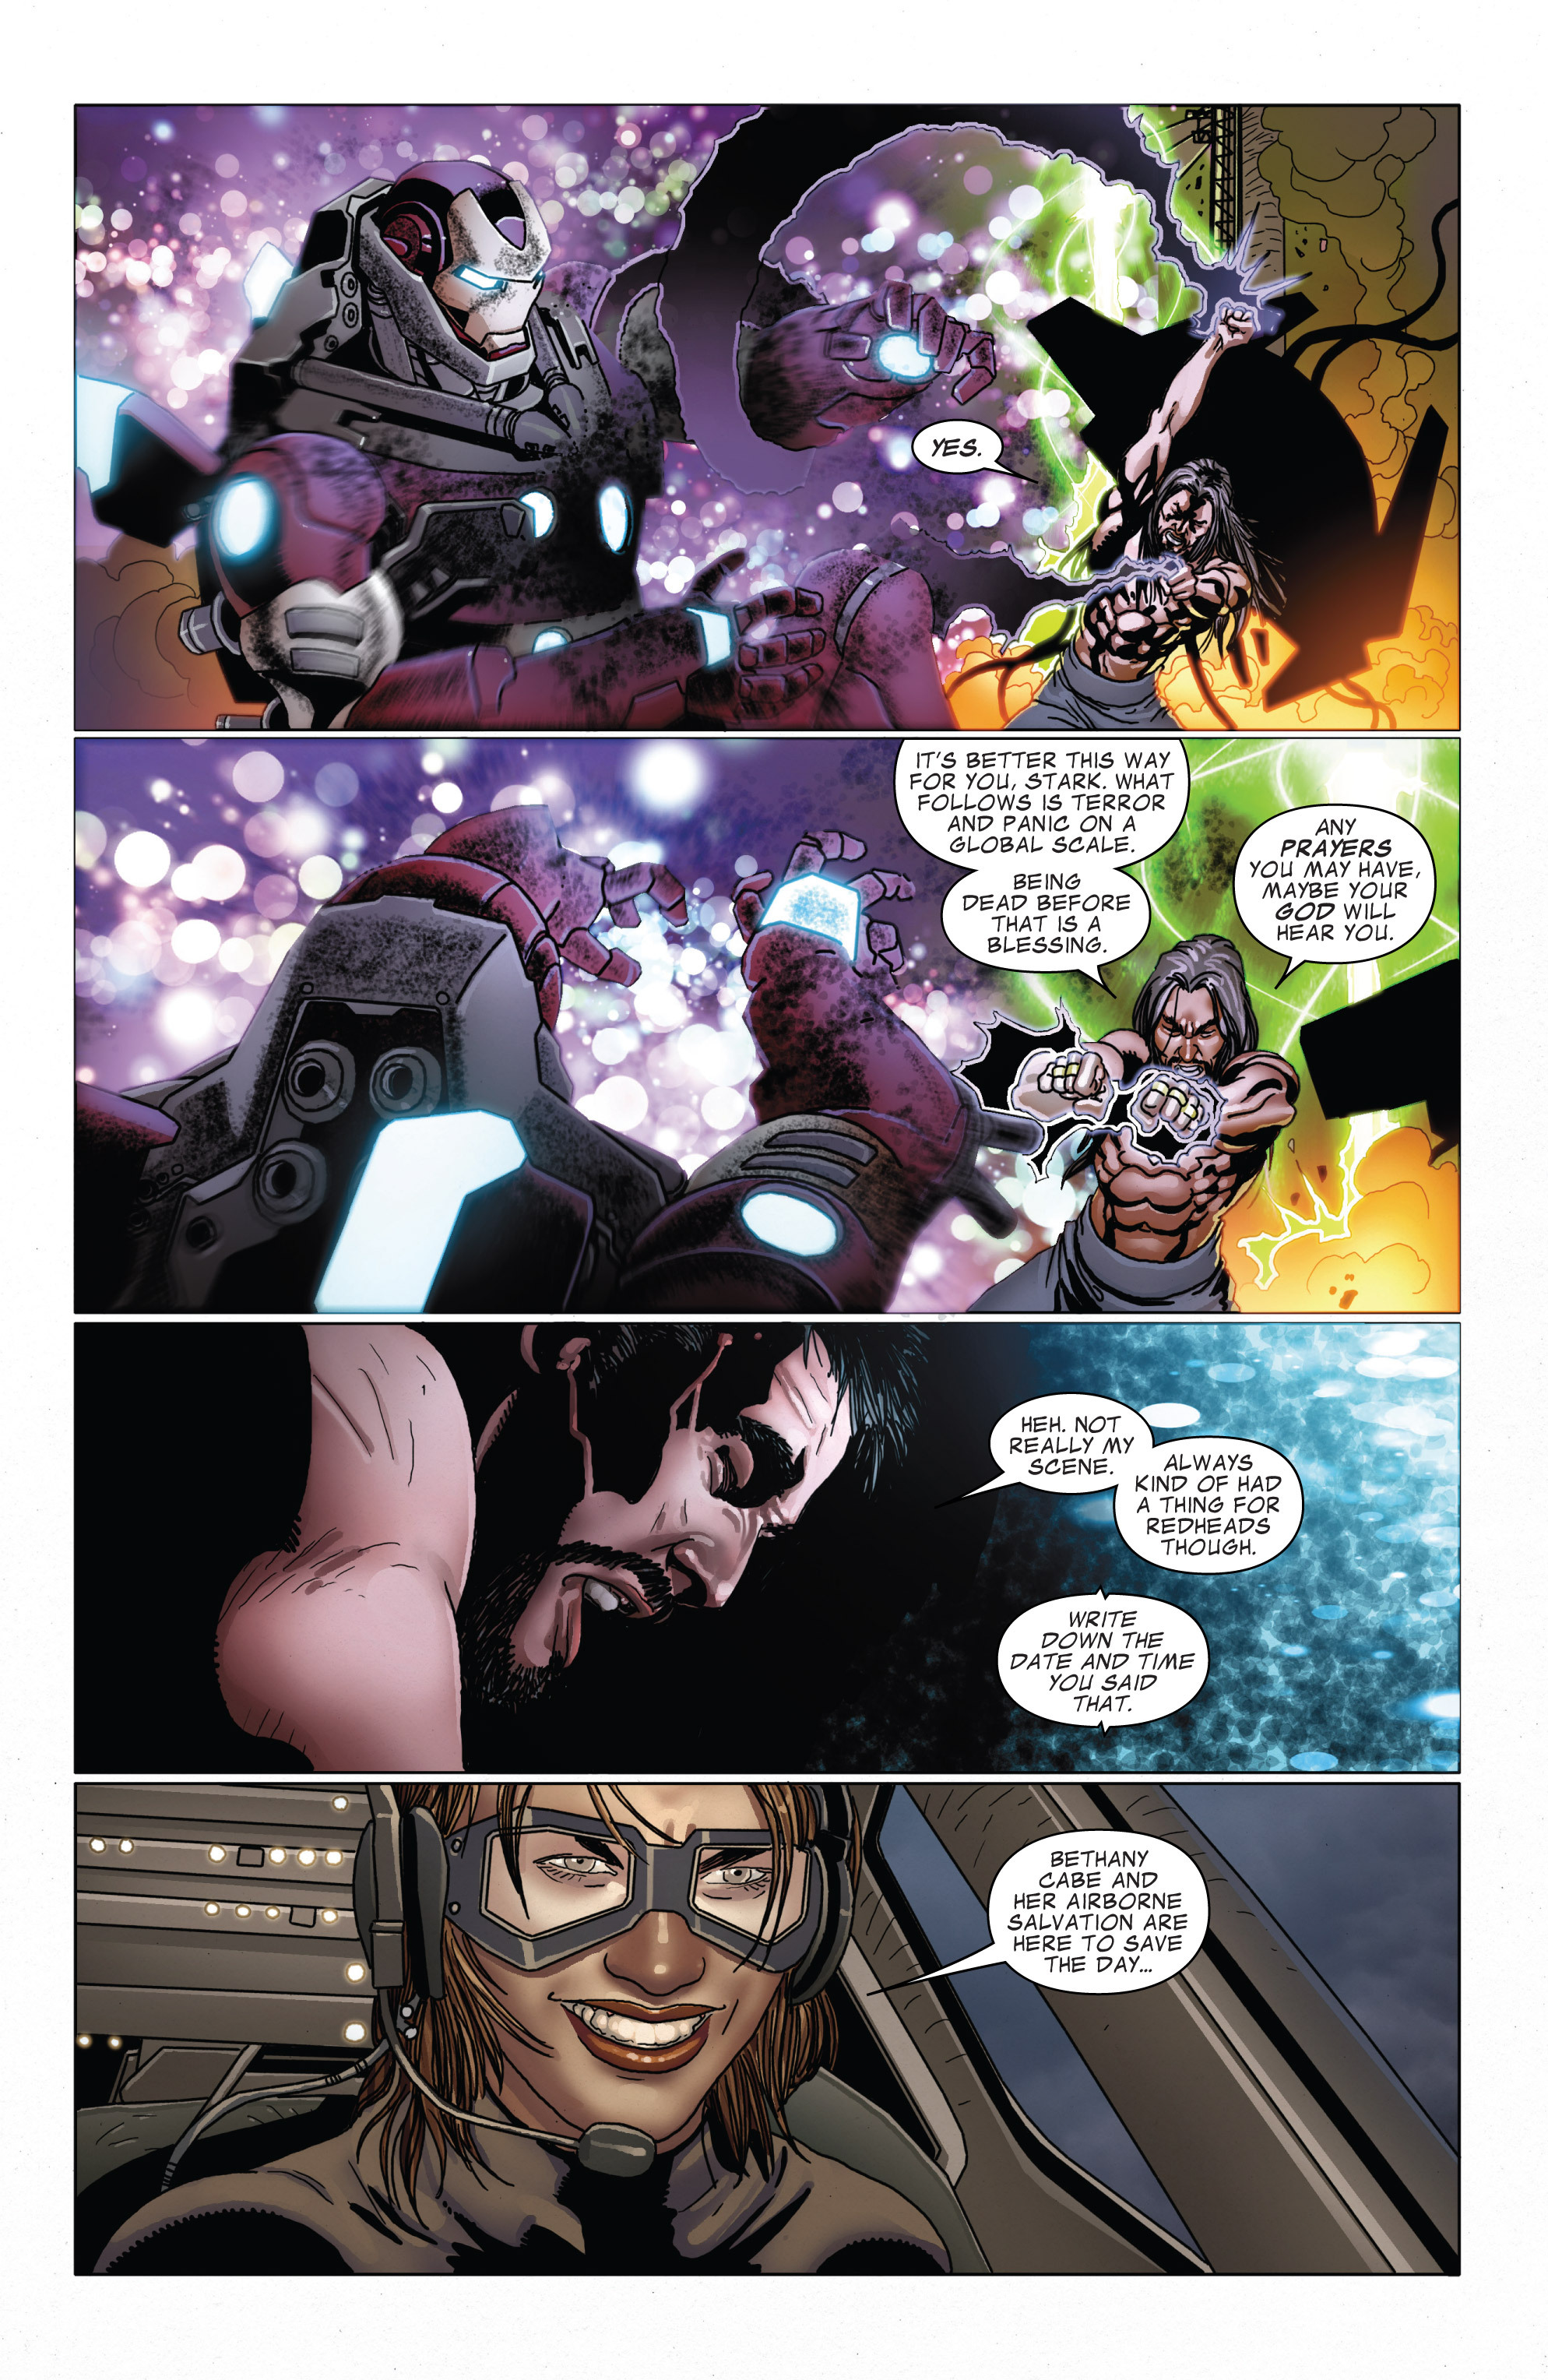 Invincible Iron Man (2008) 526 Page 8